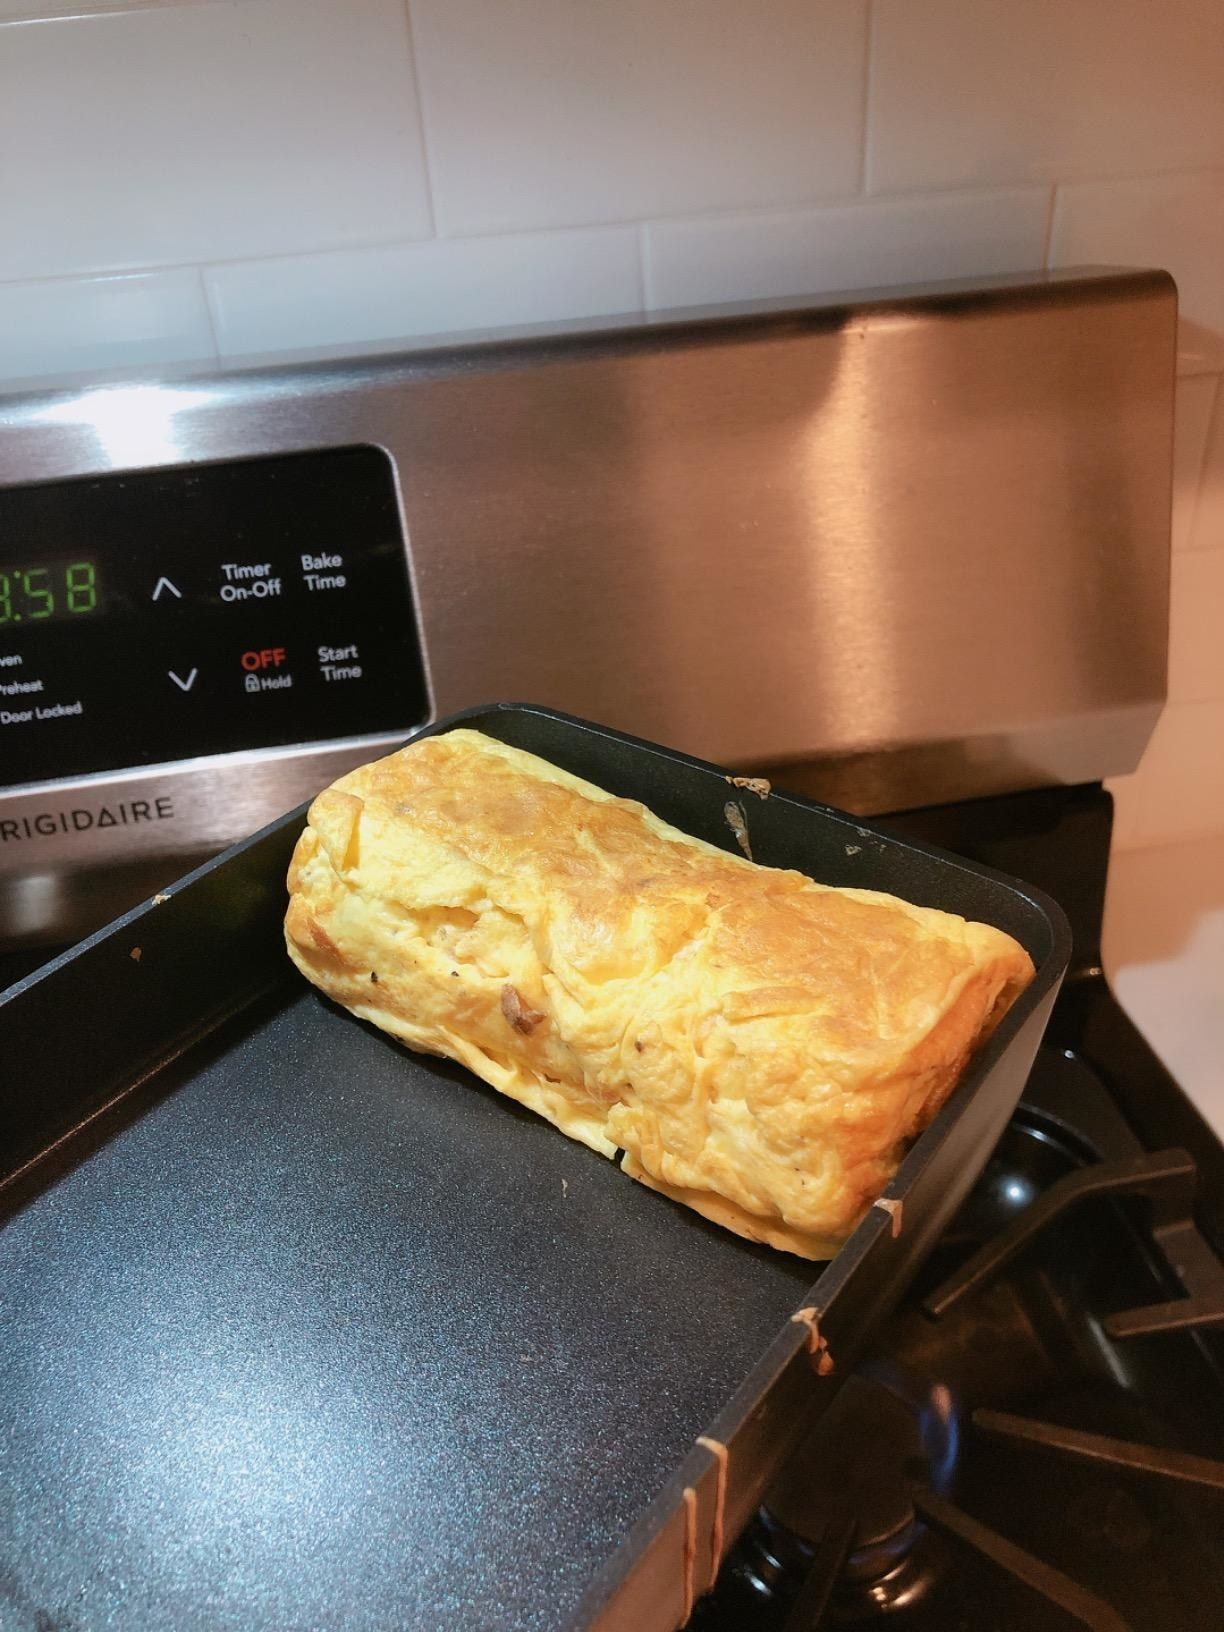 The pan being used to make a rolled omelet